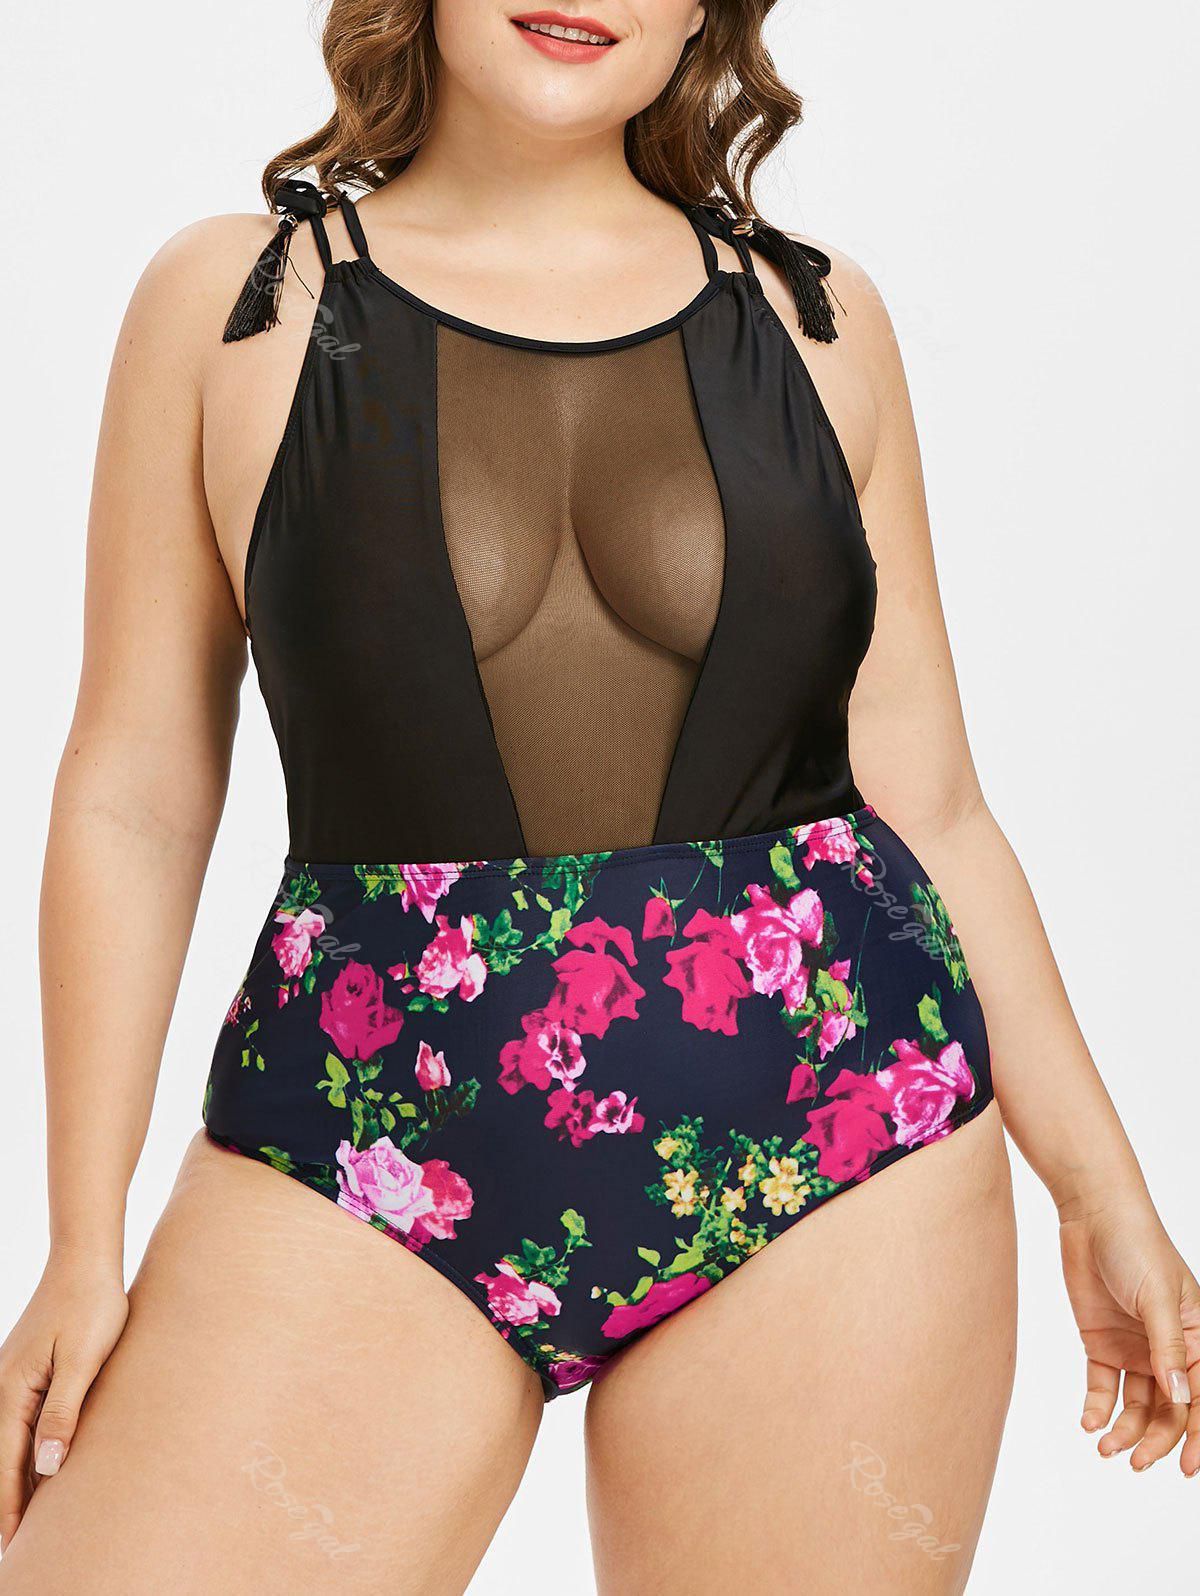 Sheer Mesh Panel Floral Print Tassels Plus Size & Curve 1950s One-piece Swimsuit - 4x